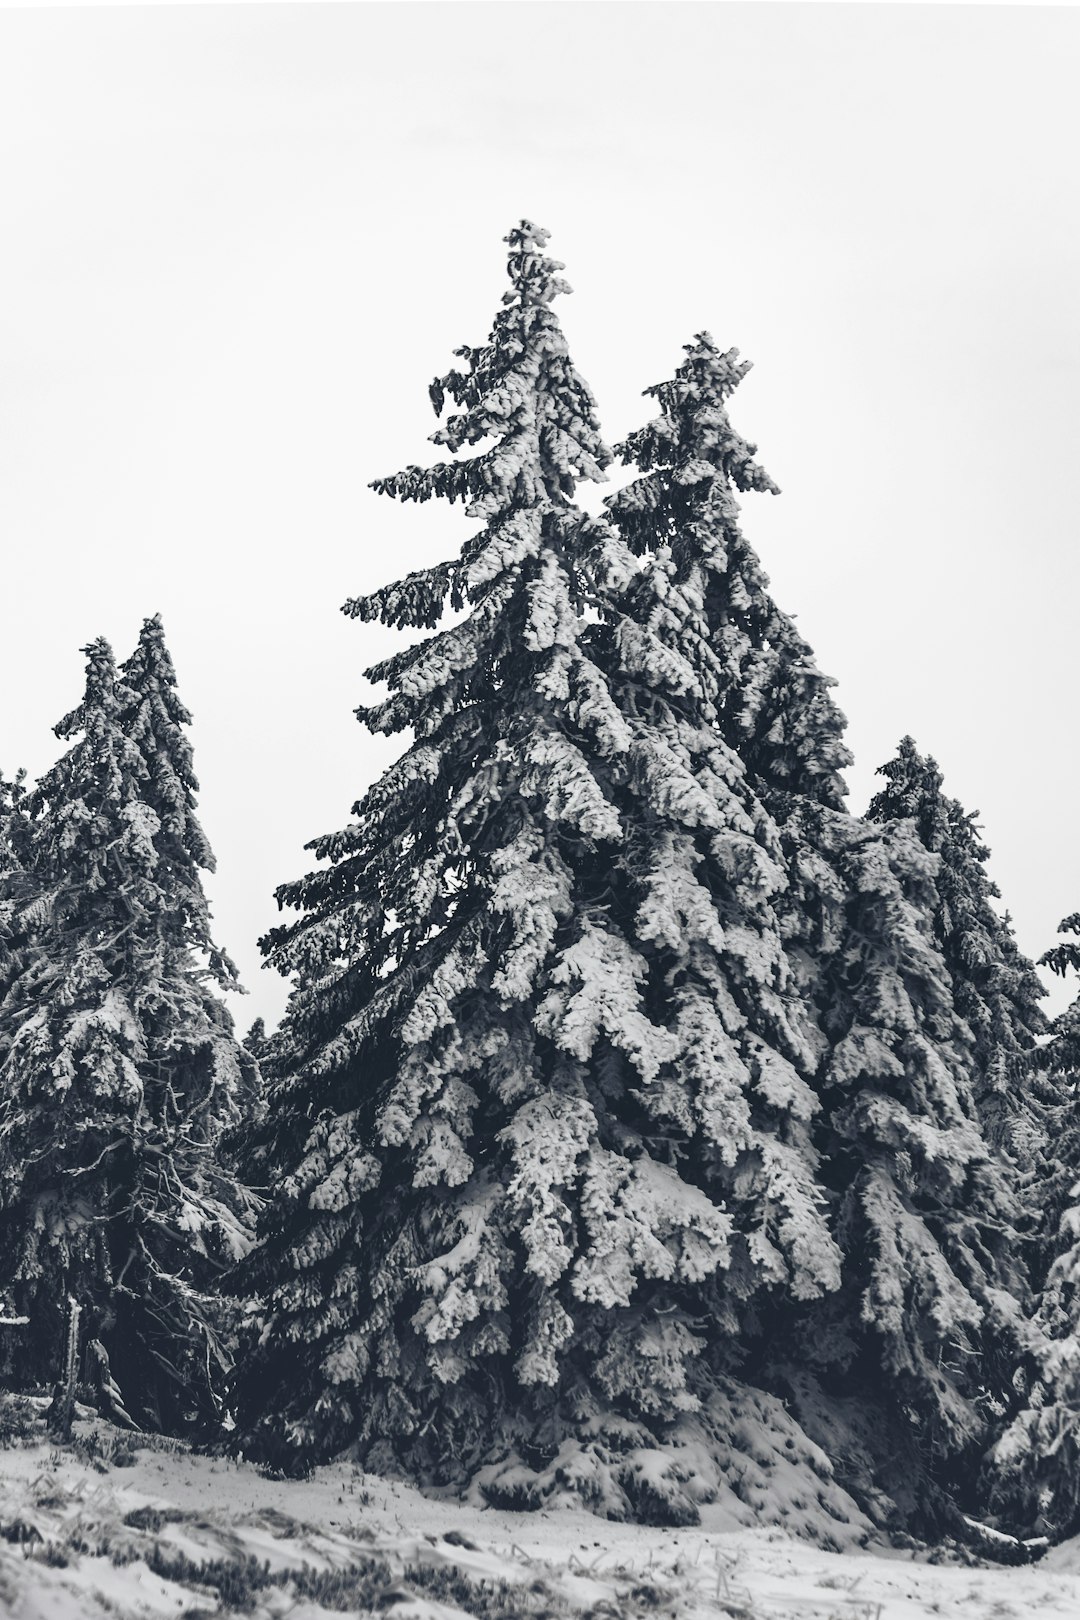 grayscale photo of pine tree covered with snow